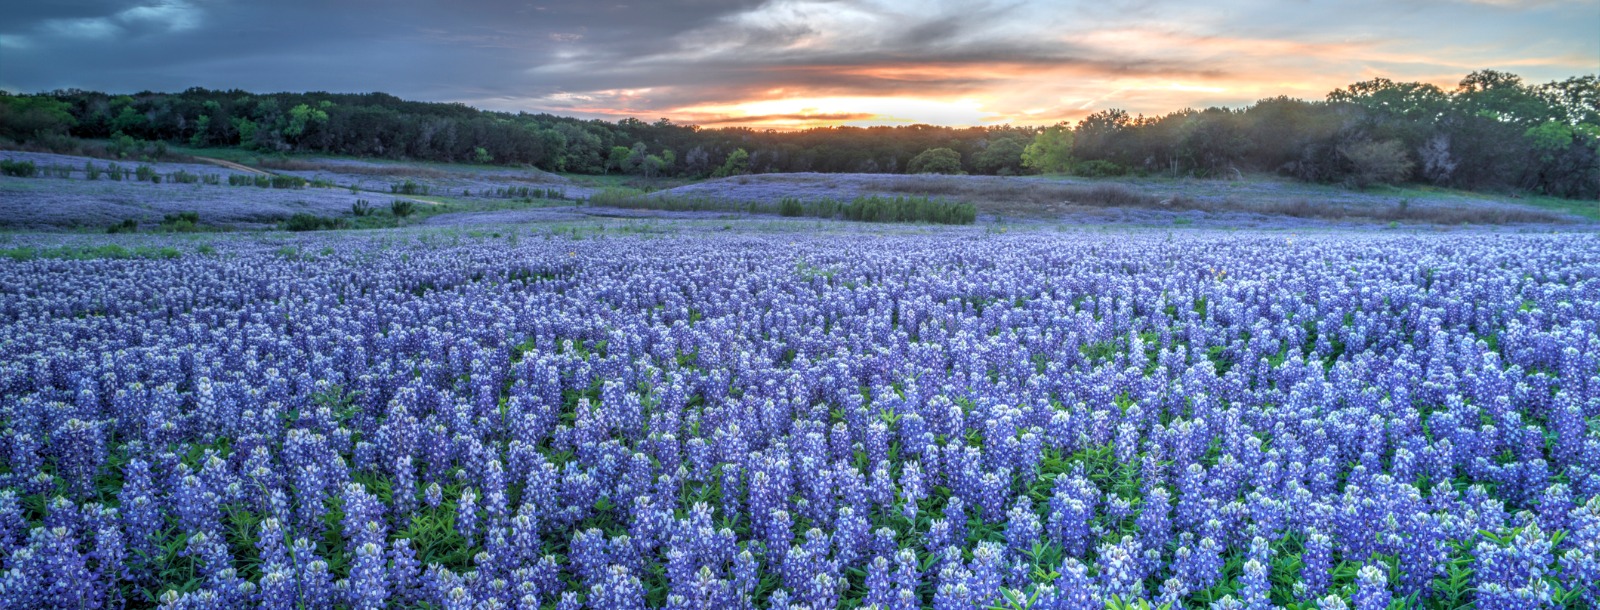 Picture of a field of Bluebonnets